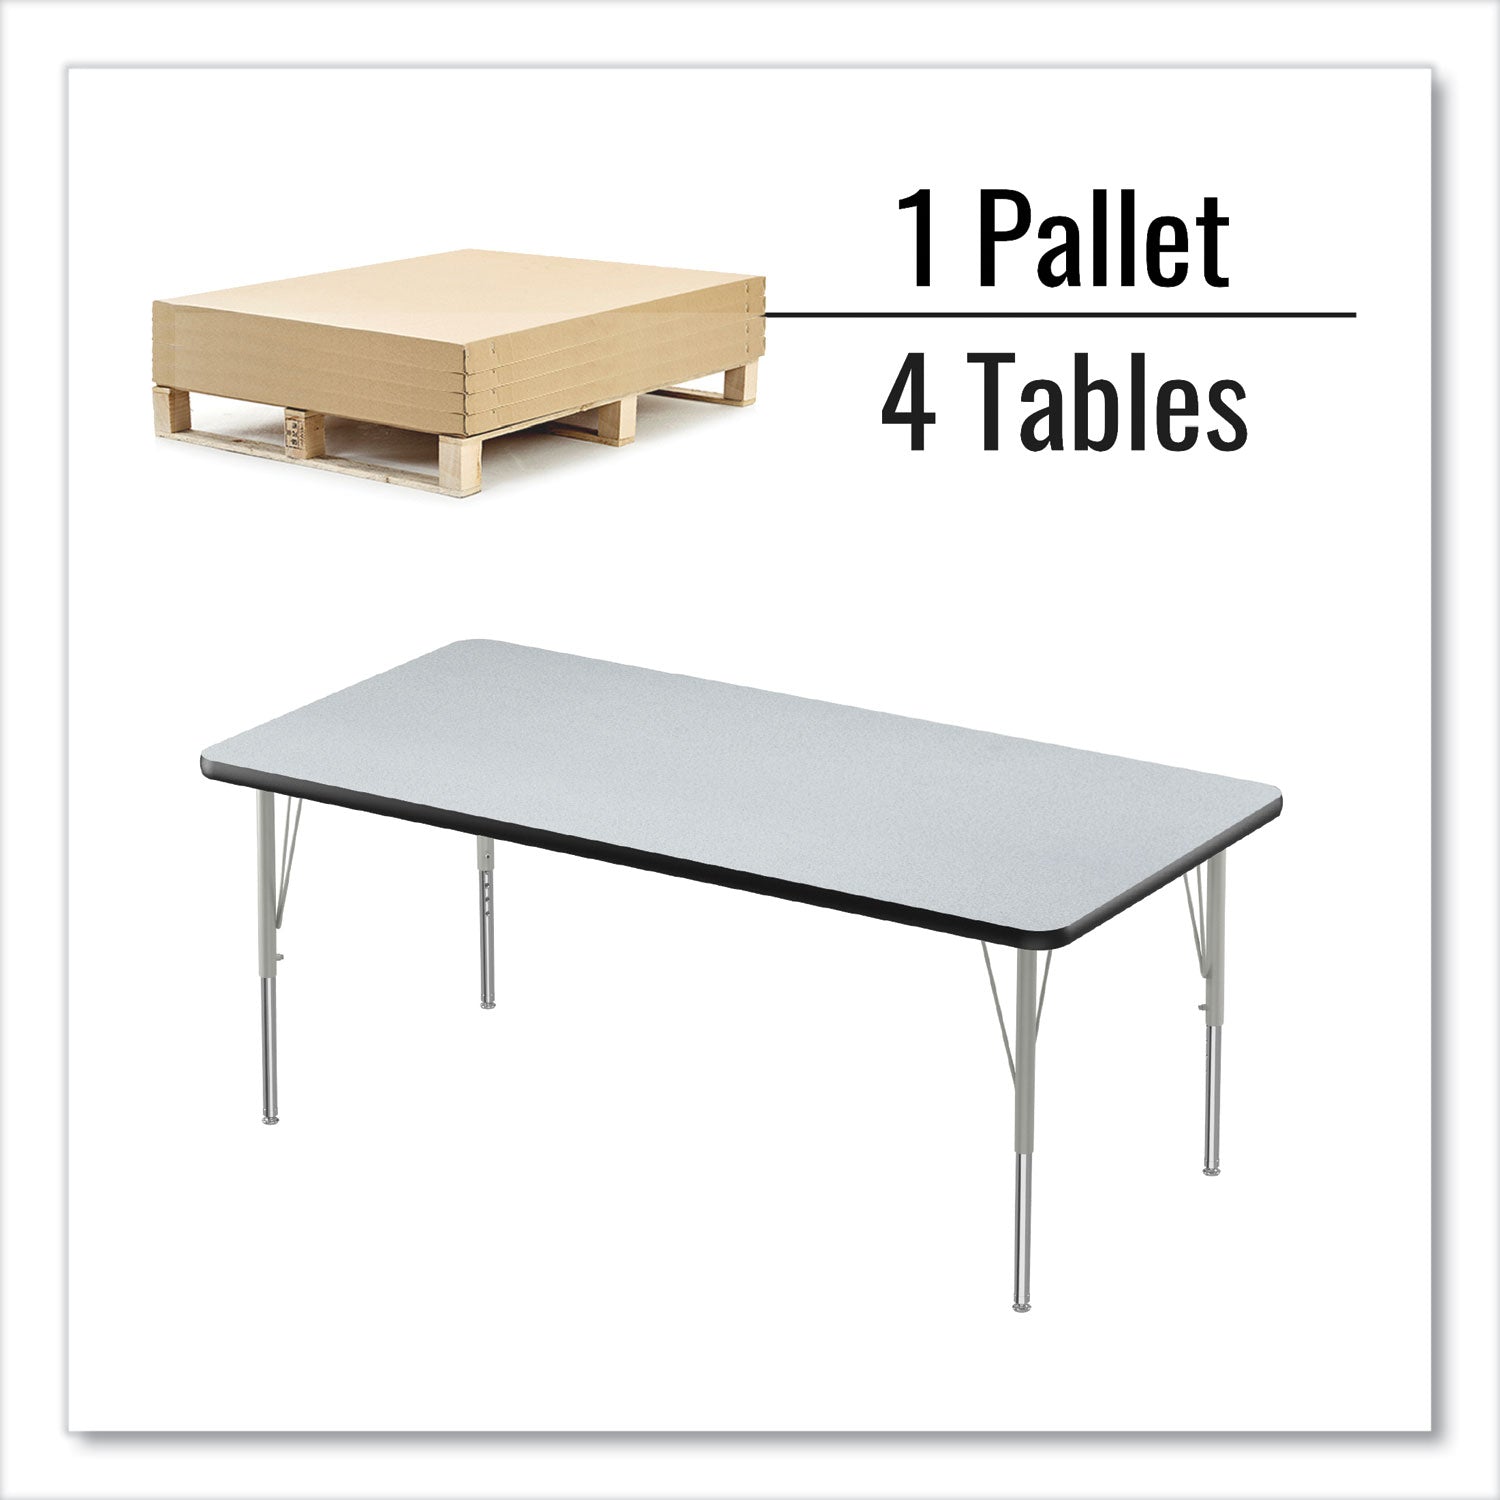 adjustable-activity-table-rectangular-60-x-30-x-19-to-29-granite-top-black-legs-4-pallet-ships-in-4-6-business-days_crl3060tf15954p - 7